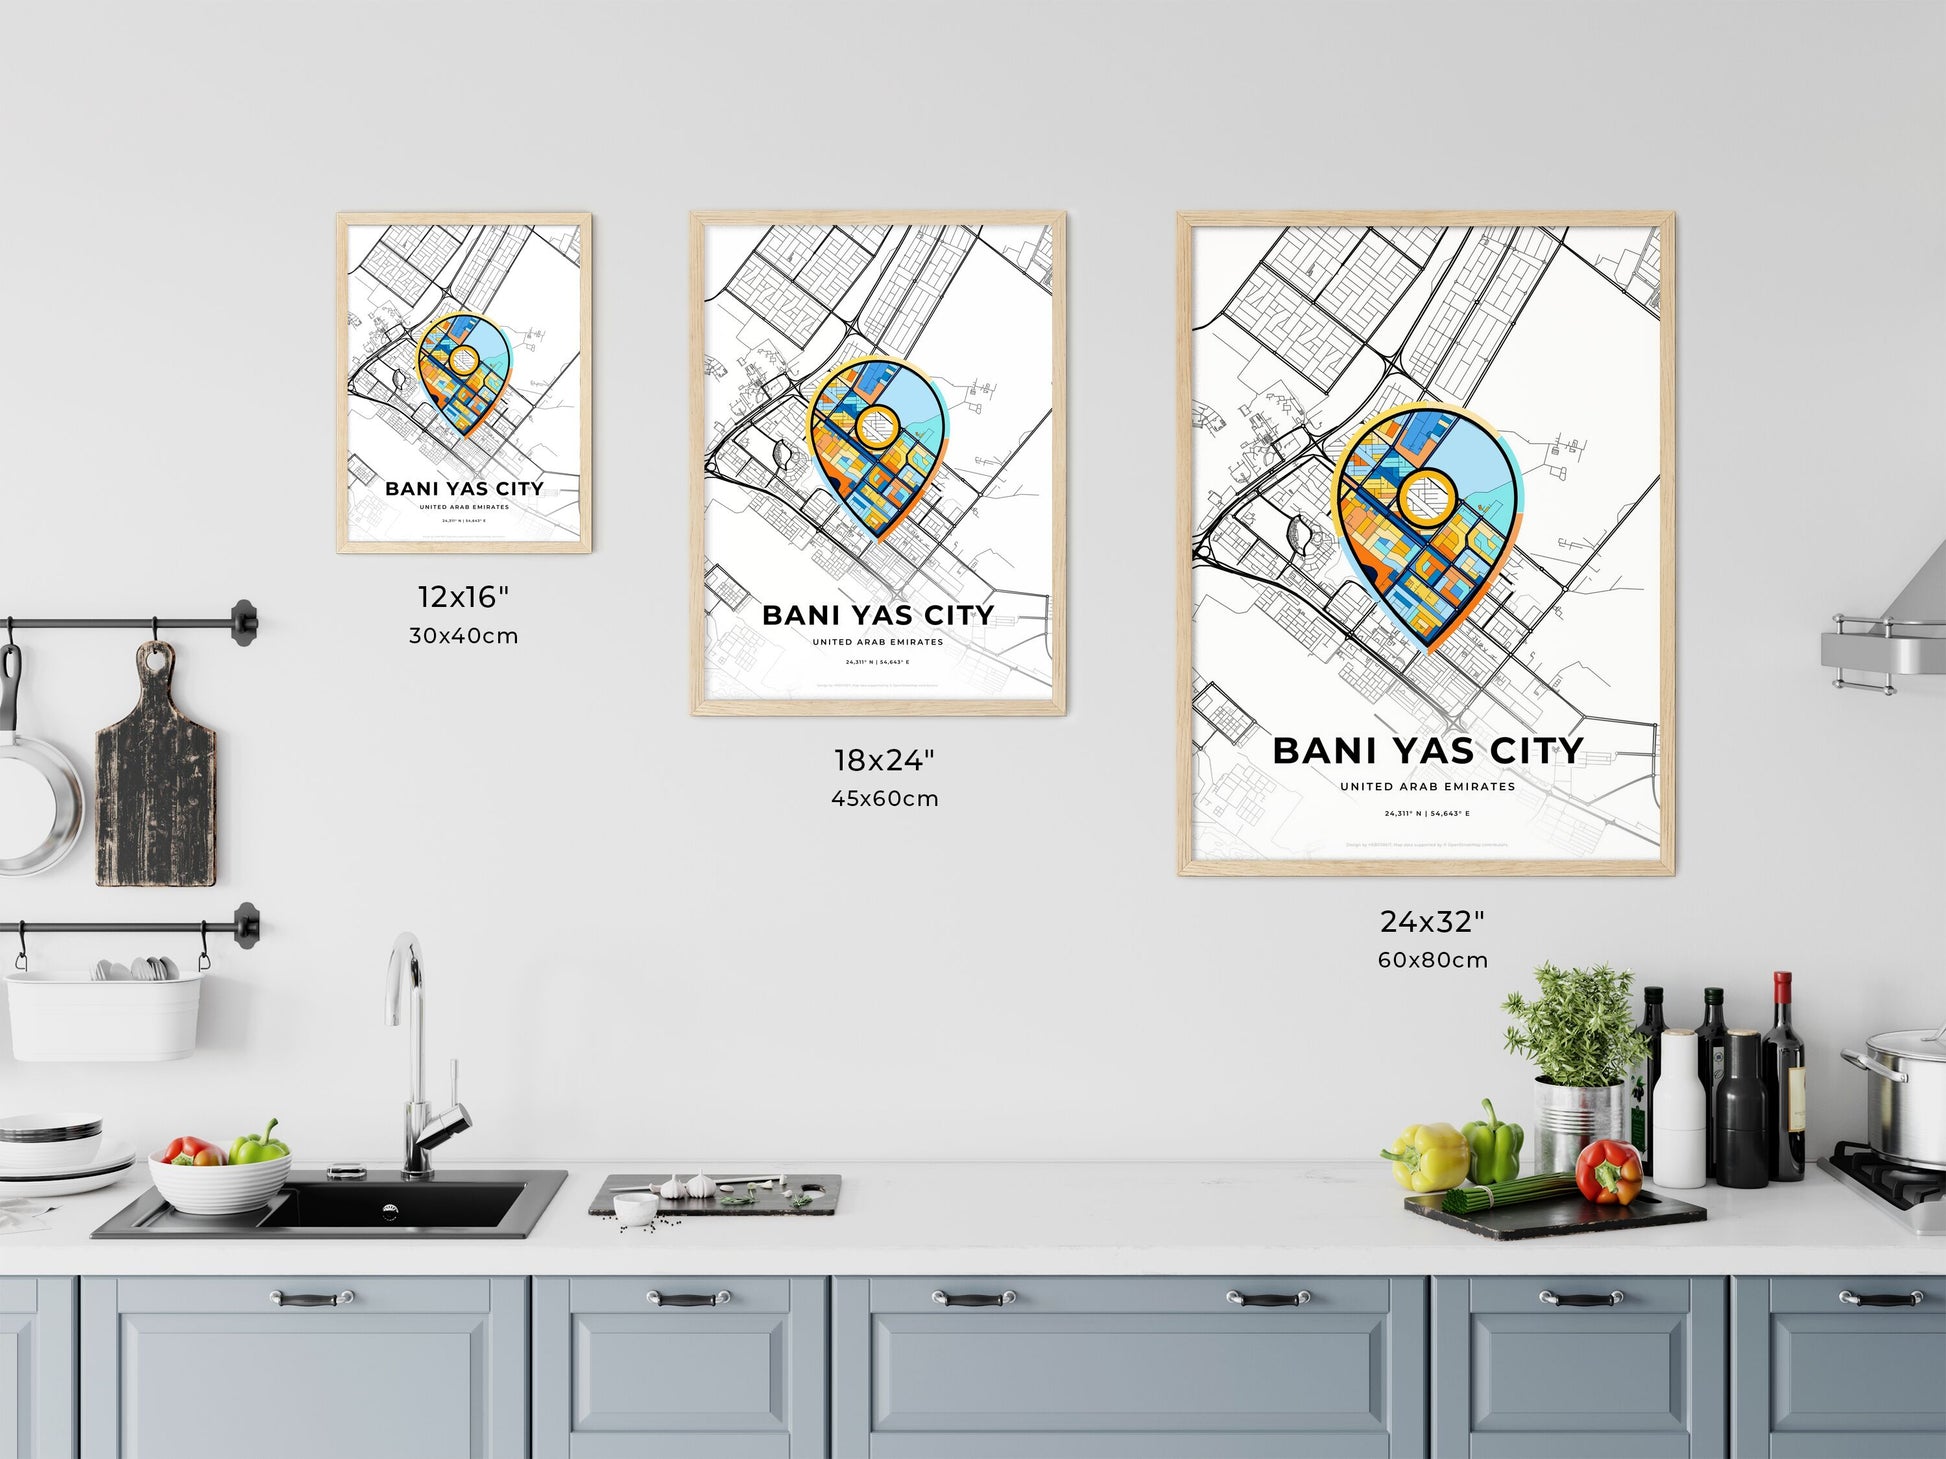 BANI YAS CITY UNITED ARAB EMIRATES minimal art map with a colorful icon. Where it all began, Couple map gift.